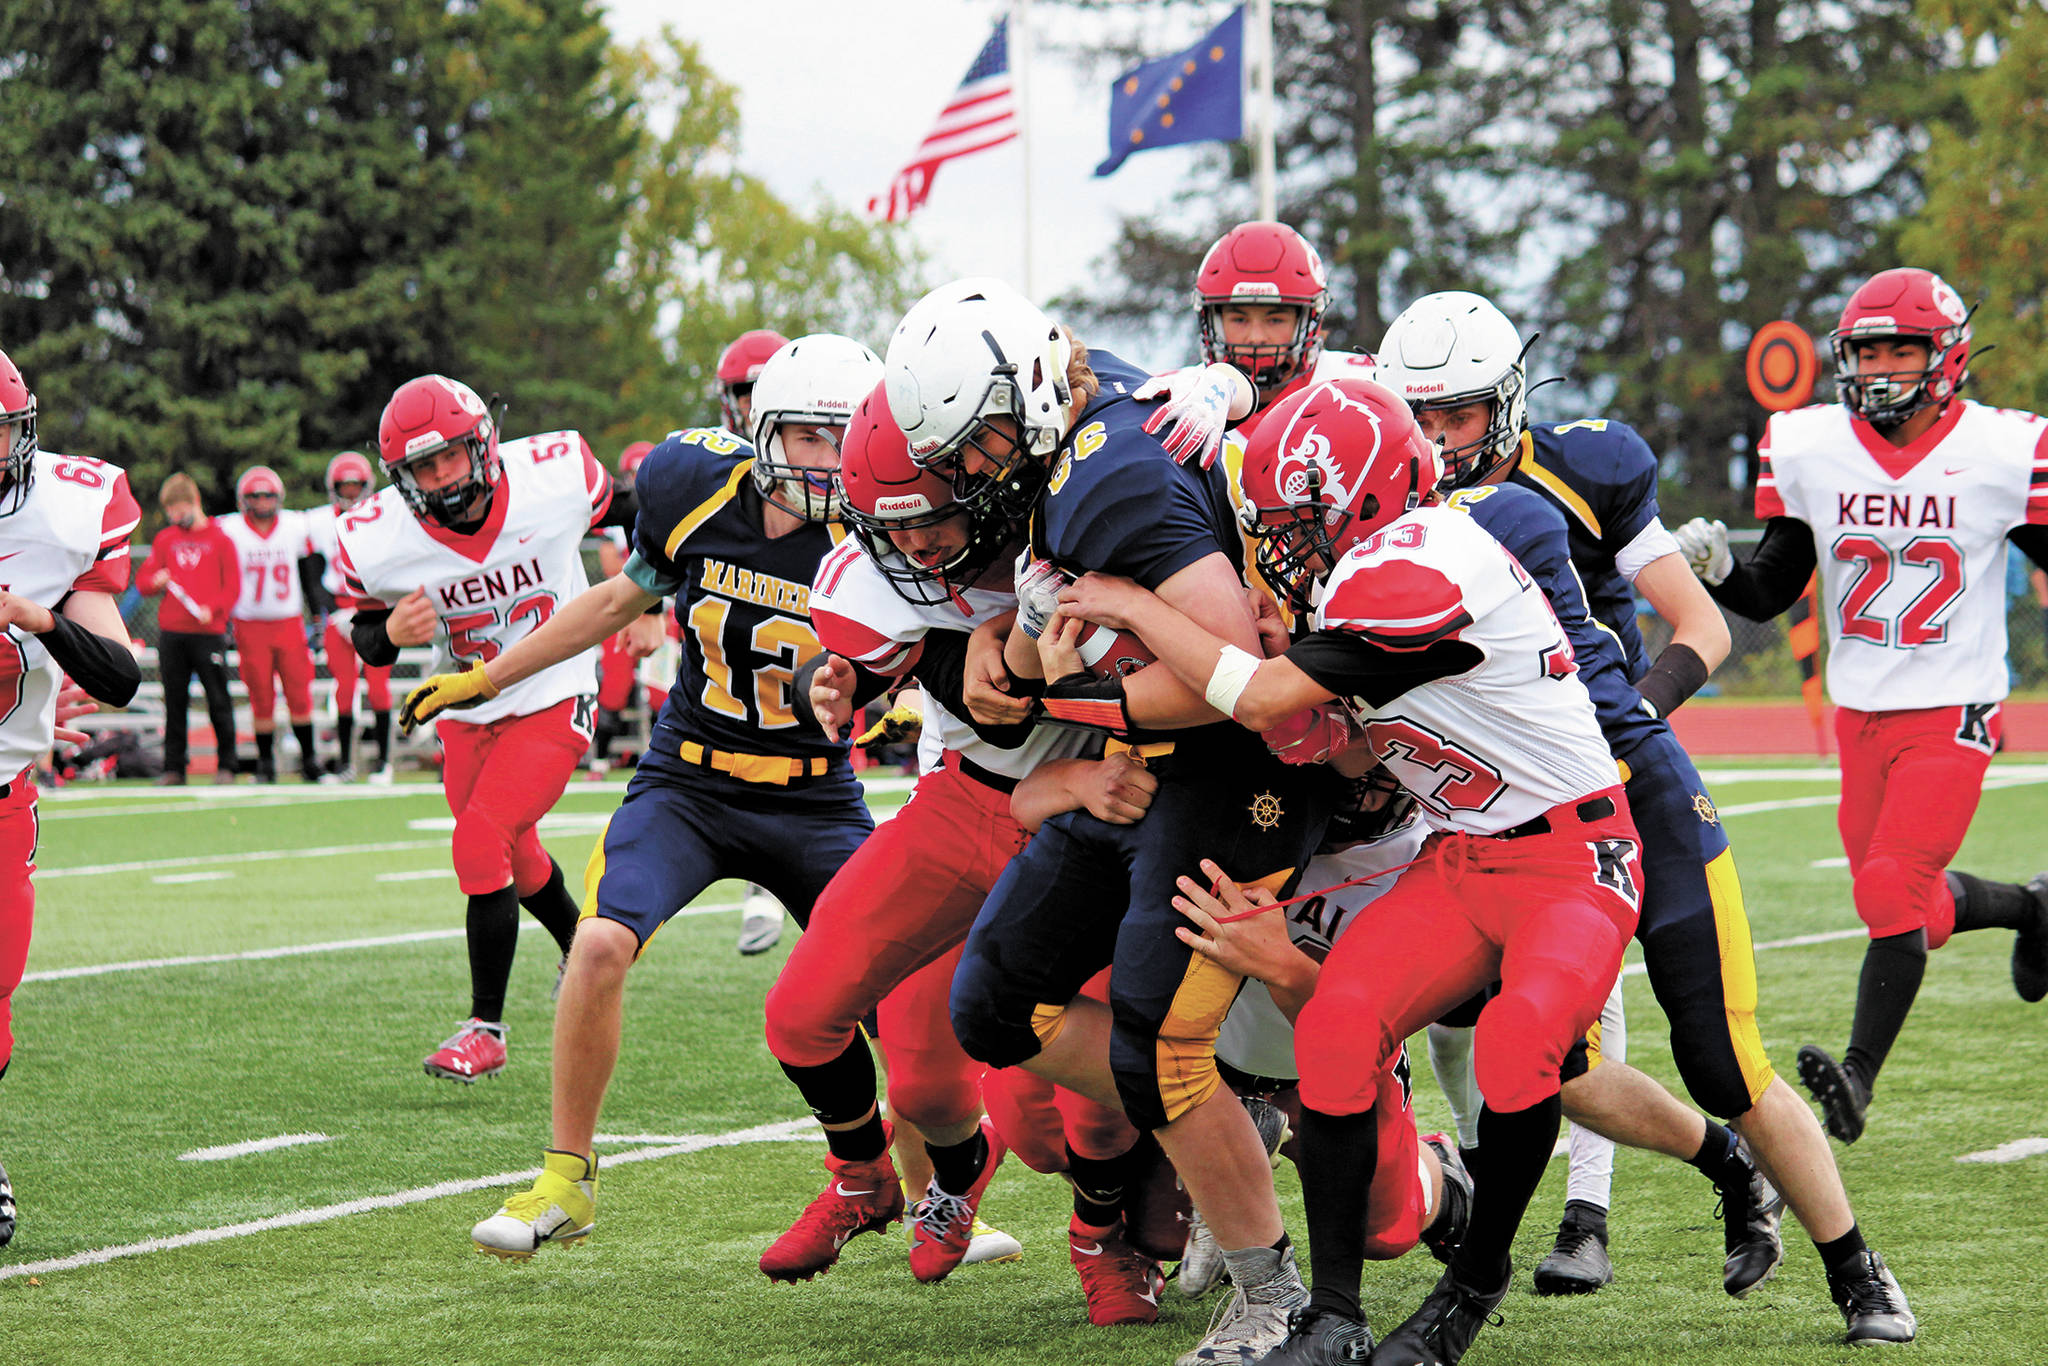 Homer’s River Mann is tackled by a group of Kardinals during a Saturday, Sept. 19, 2020 football game against Kenai Central High School at Homer High School in Homer, Alaska. The Mariners won 44-6. (Photo by Megan Pacer/Homer News)